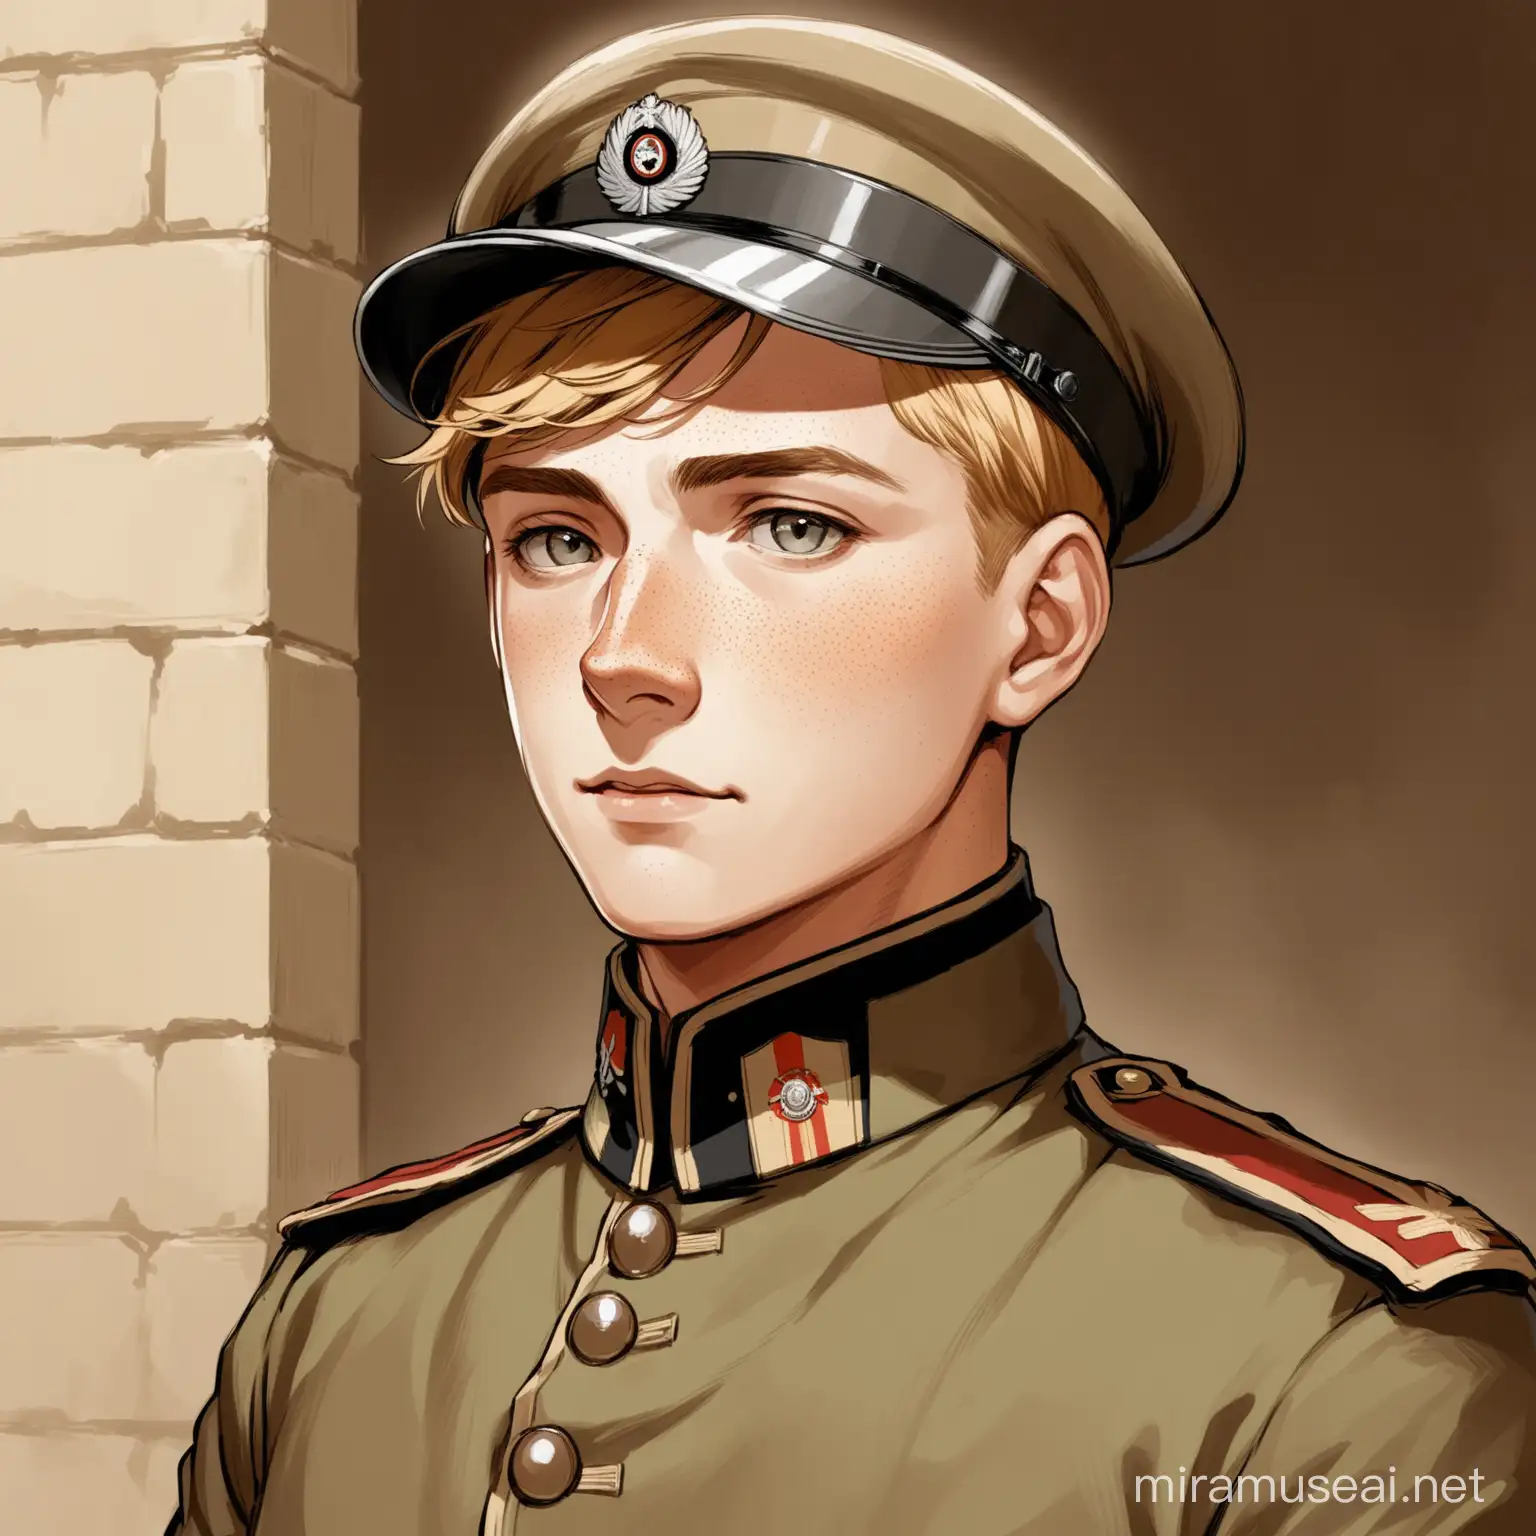 A handsome German Empire Corporal soldier in WW1 semi-realism art-style male in almost semi-anime-like, early twenties, with typical 1910s uniform clothes of a German Empire soldier, gray eyes, short-cropped, sandy blond hair, kept neatly trimmed, barely noticeable scars on face with freckles. Standing, half body view, at a trench in spring 1910s France.